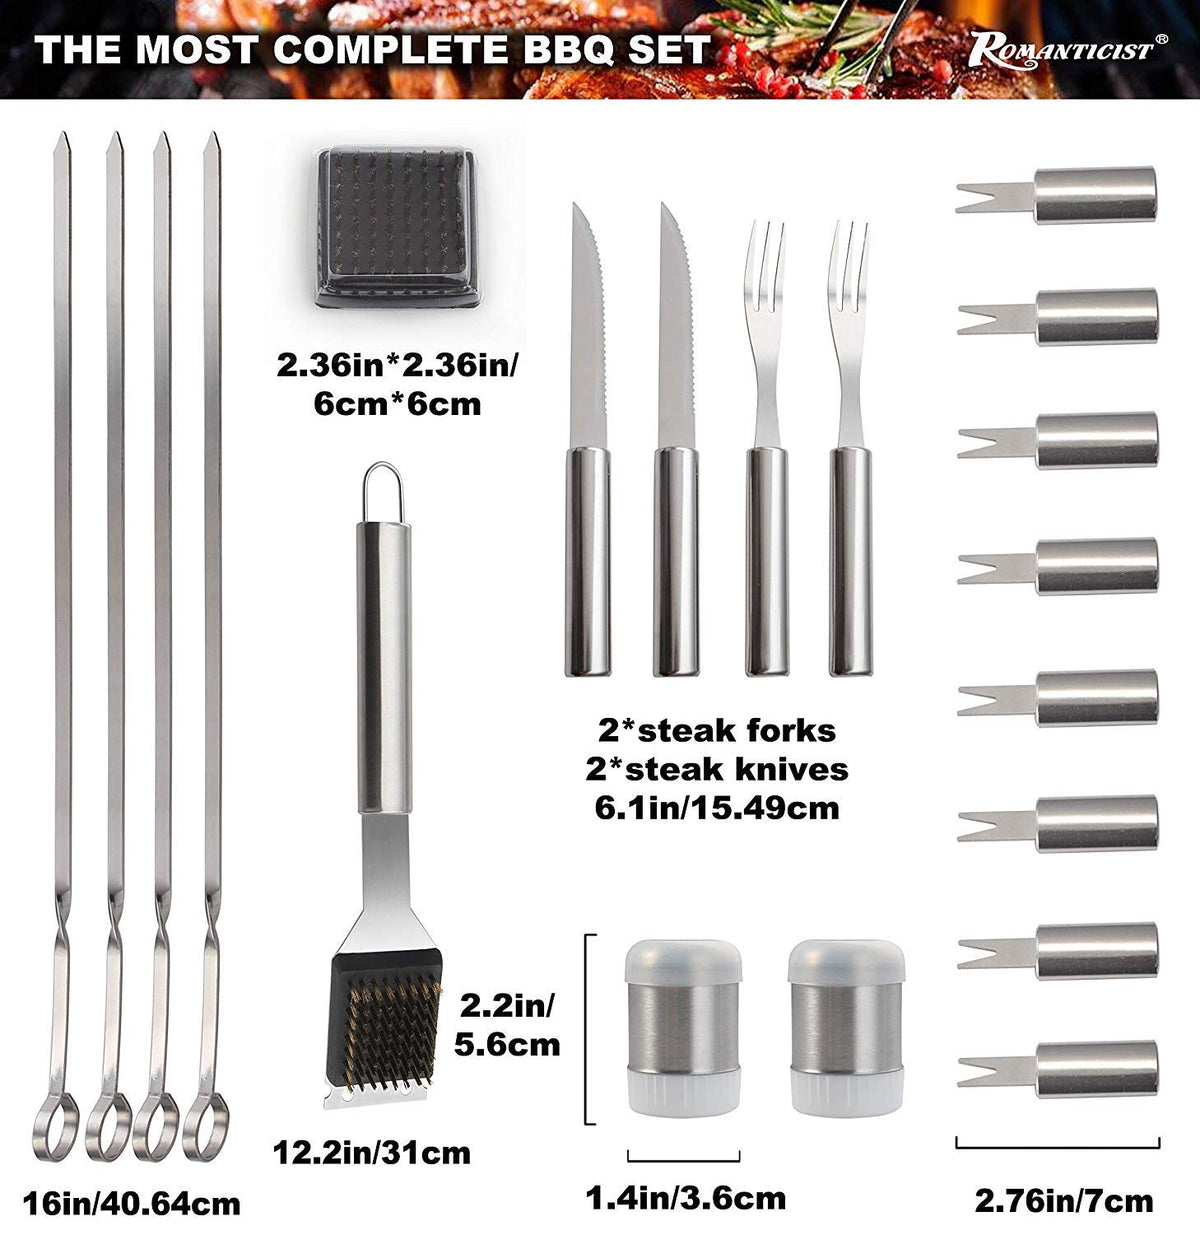 ROMANTICIST 20pc Heavy Duty BBQ Grill Tool Set in Case - The Very Best  Grill Gift on Birthday Wedding - Professional BBQ Accessories Set for  Outdoor